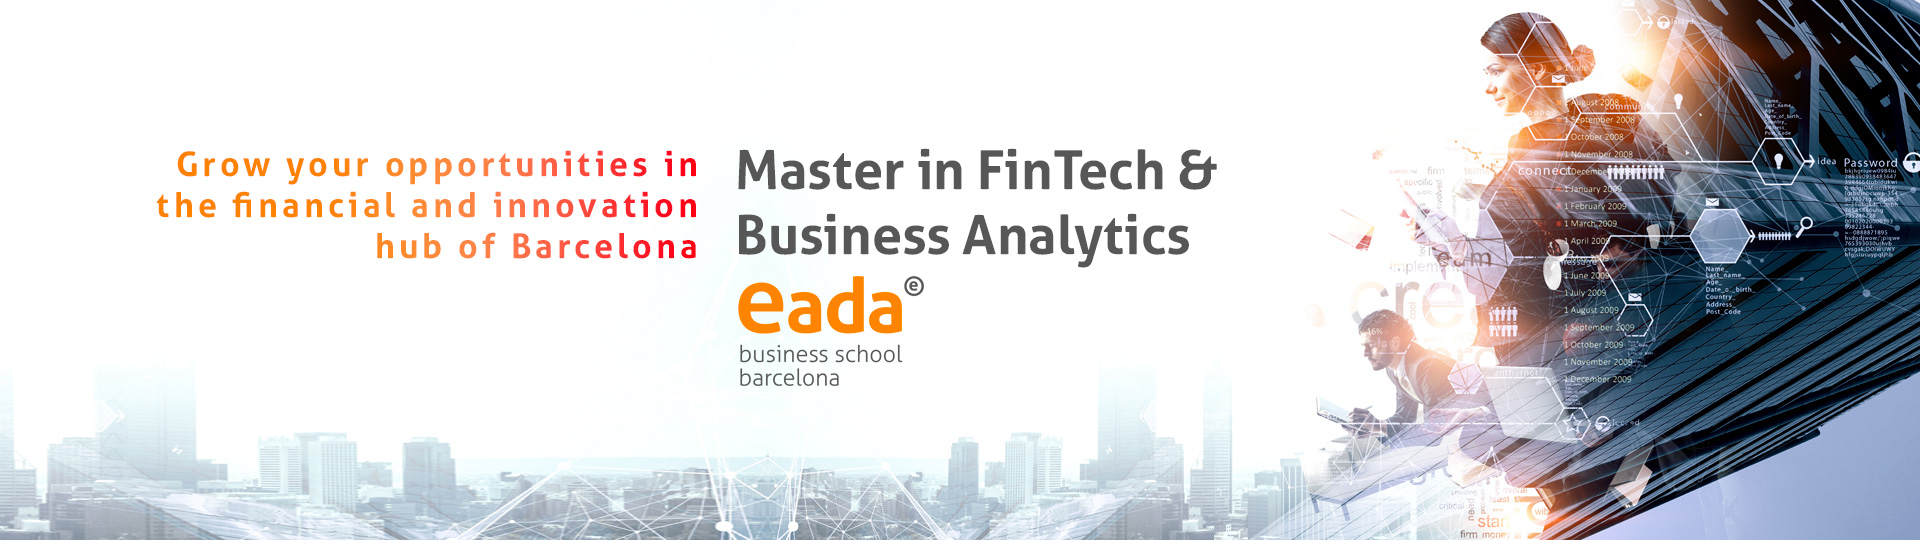 Master in FinTech & Business Analytics: Grow your opportunities in the financial and innovation hub of Barcelona